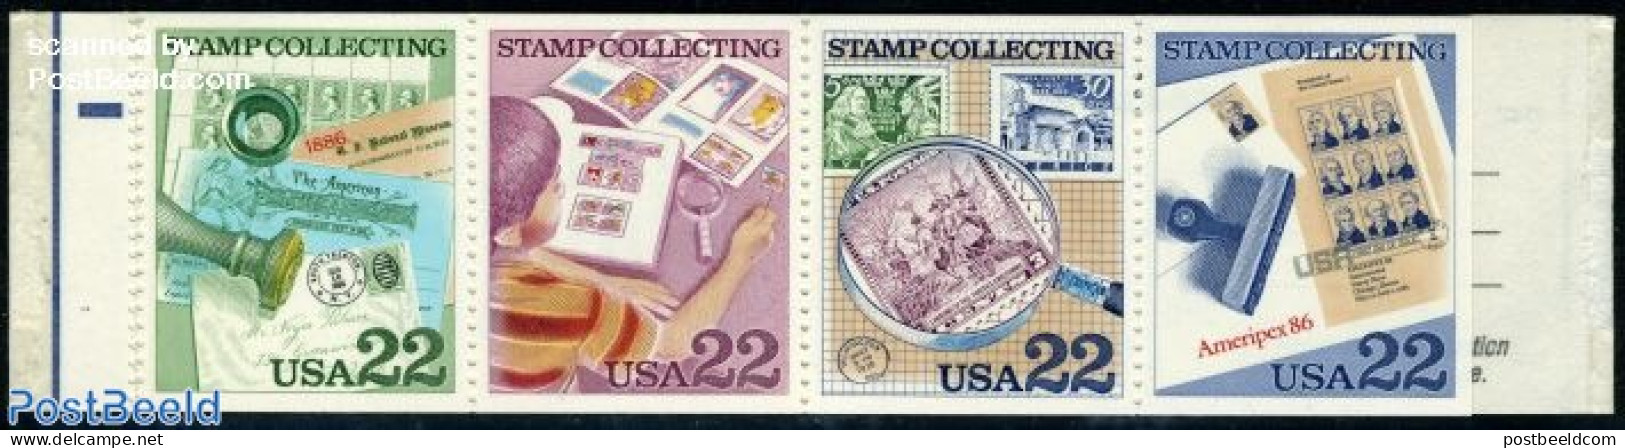 United States Of America 1986 Ameripex Booklet, Mint NH, Philately - Stamp Booklets - Stamps On Stamps - Ungebraucht